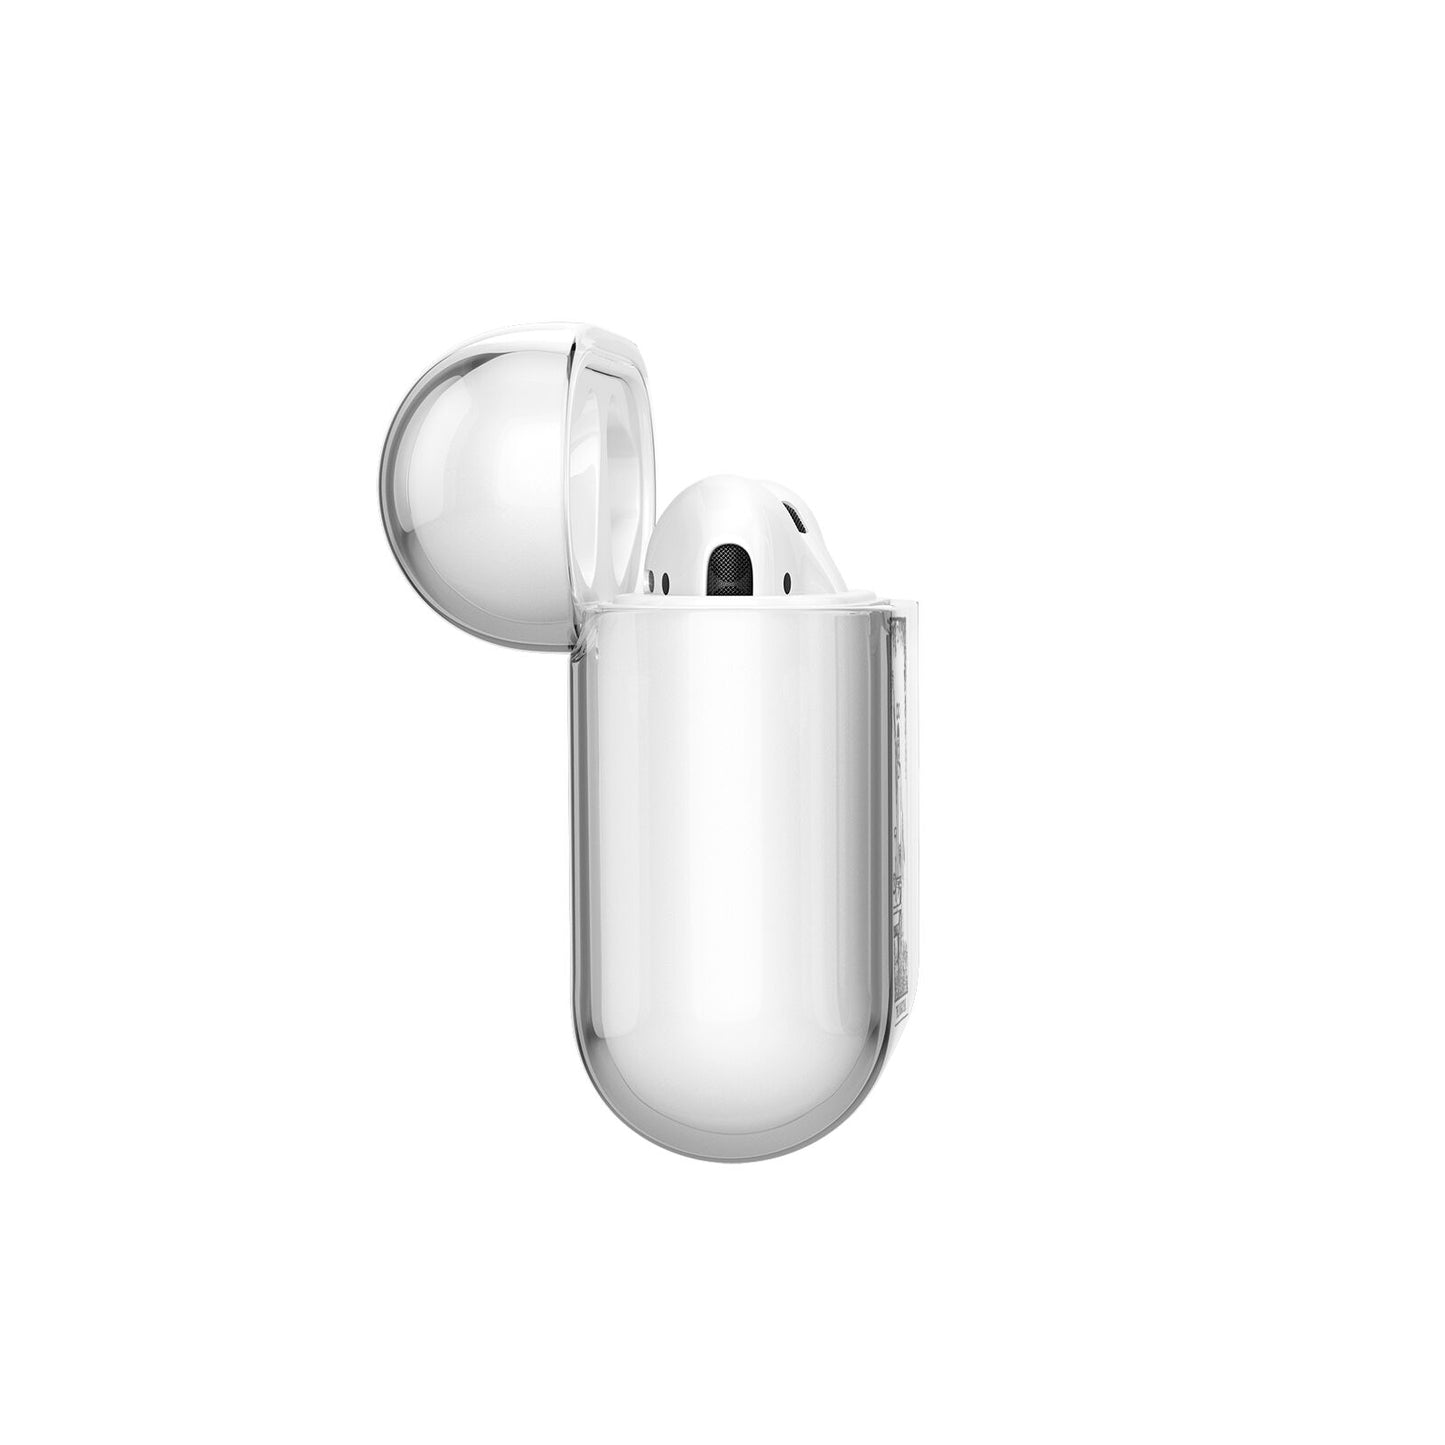 The Magician Monochrome Tarot Card AirPods Case Side Angle